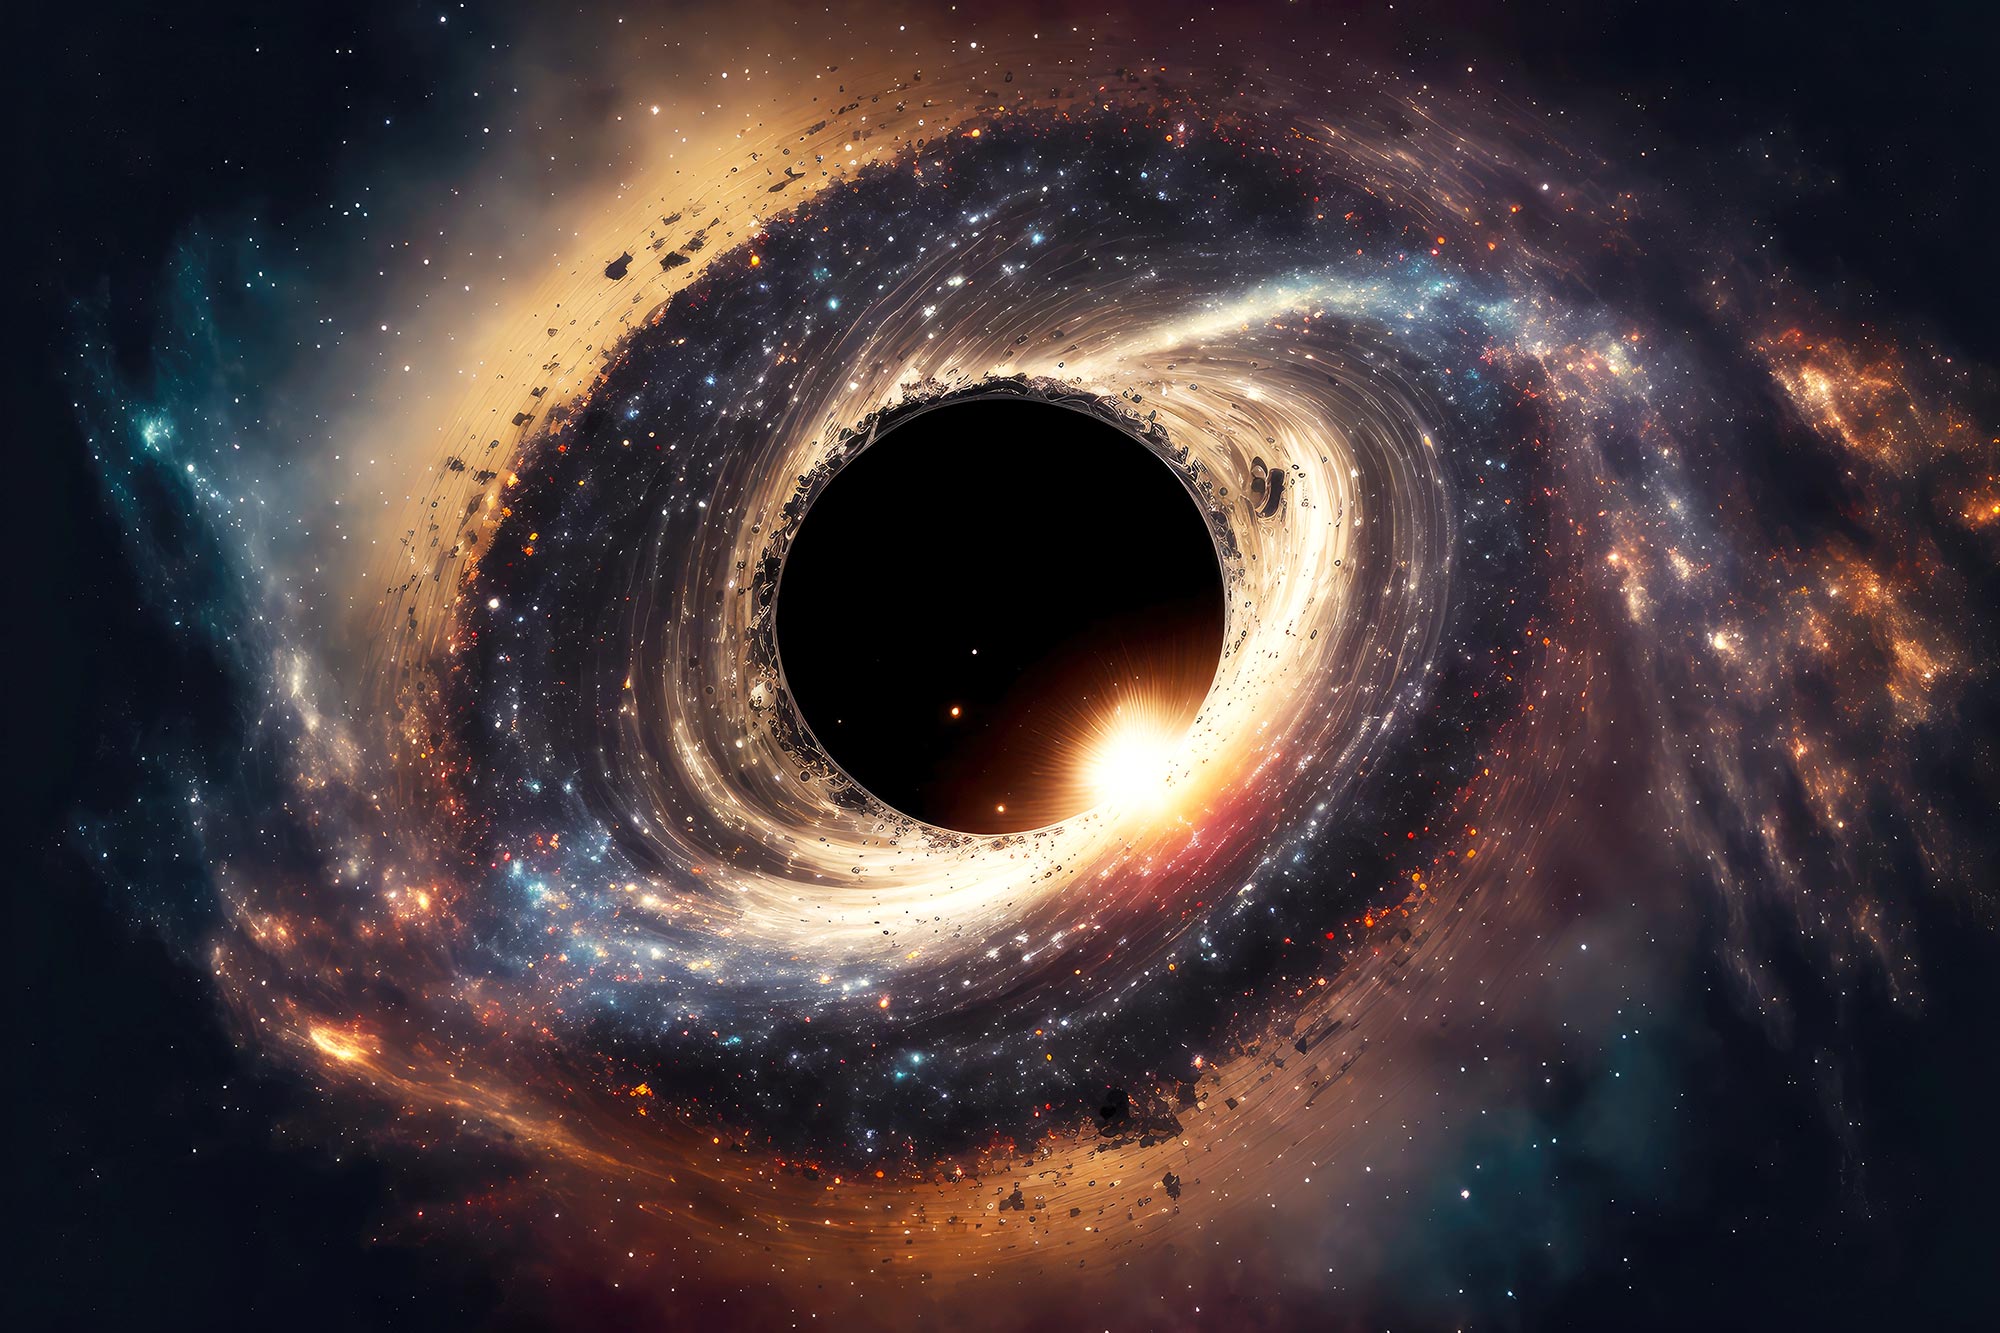 Astronomers have discovered a black hole closer to Earth than ever before